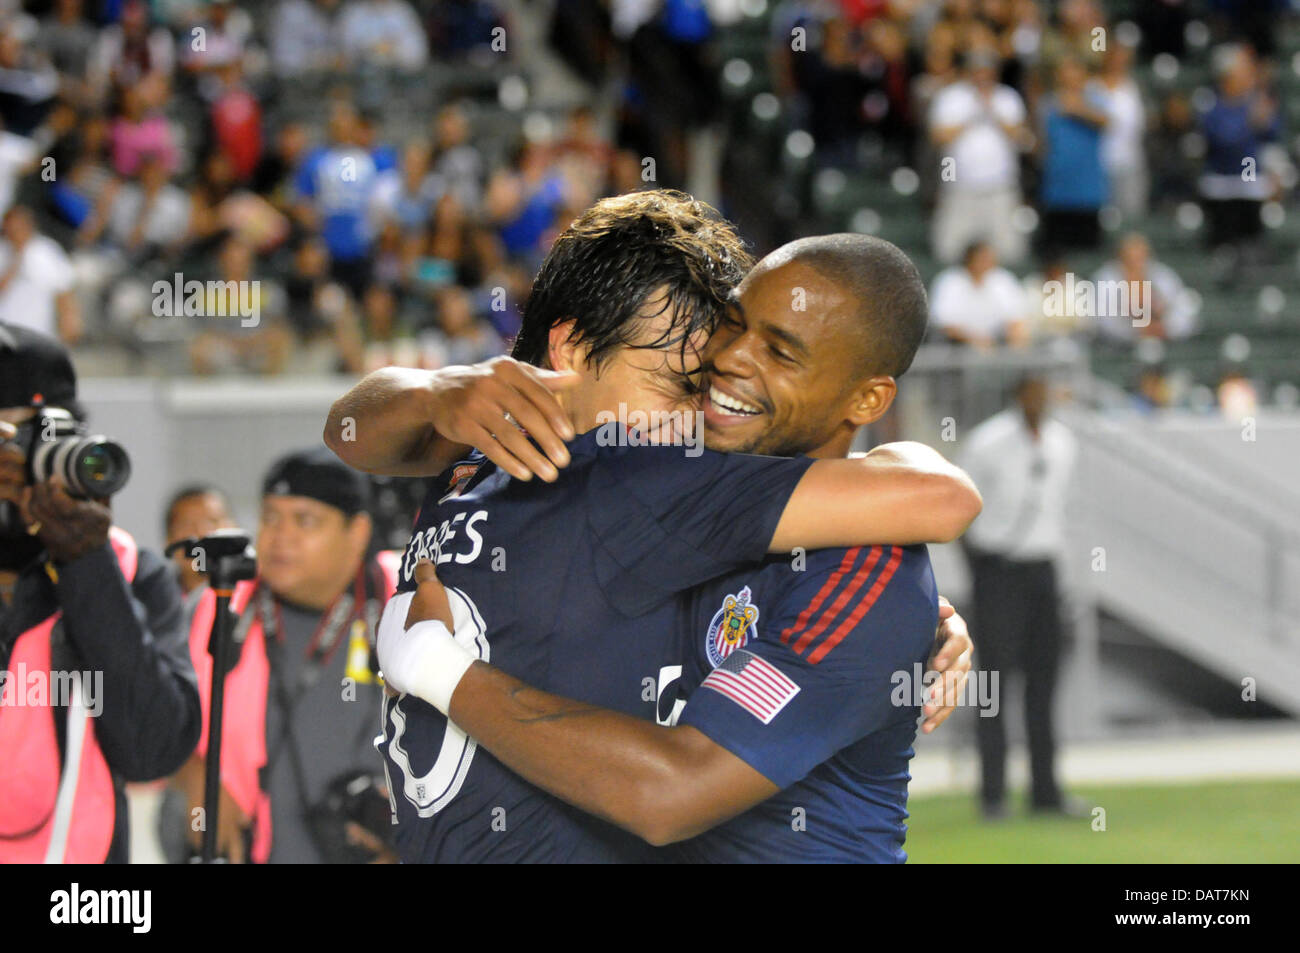 July 18, 2013 - Carson, California, USA - MLS-Major League Soccer-Chivas USA forward ERICK TORRES celebrates with team mate TRISTAN BOWEN after scoring the only goal of the match as Chivas USA defeats Toronto FC, 1 to 0, at the Home Depot Center, Carson, California, USA, July 17, 2013.   Early in the first half of play a Chivas USA player was ejected from the game which made the win even sweater for Chivas USA fans..Credit Image  cr  Scott Mitchell/ZUMA Press (Credit Image: © Scott Mitchell/ZUMAPRESS.com) Stock Photo